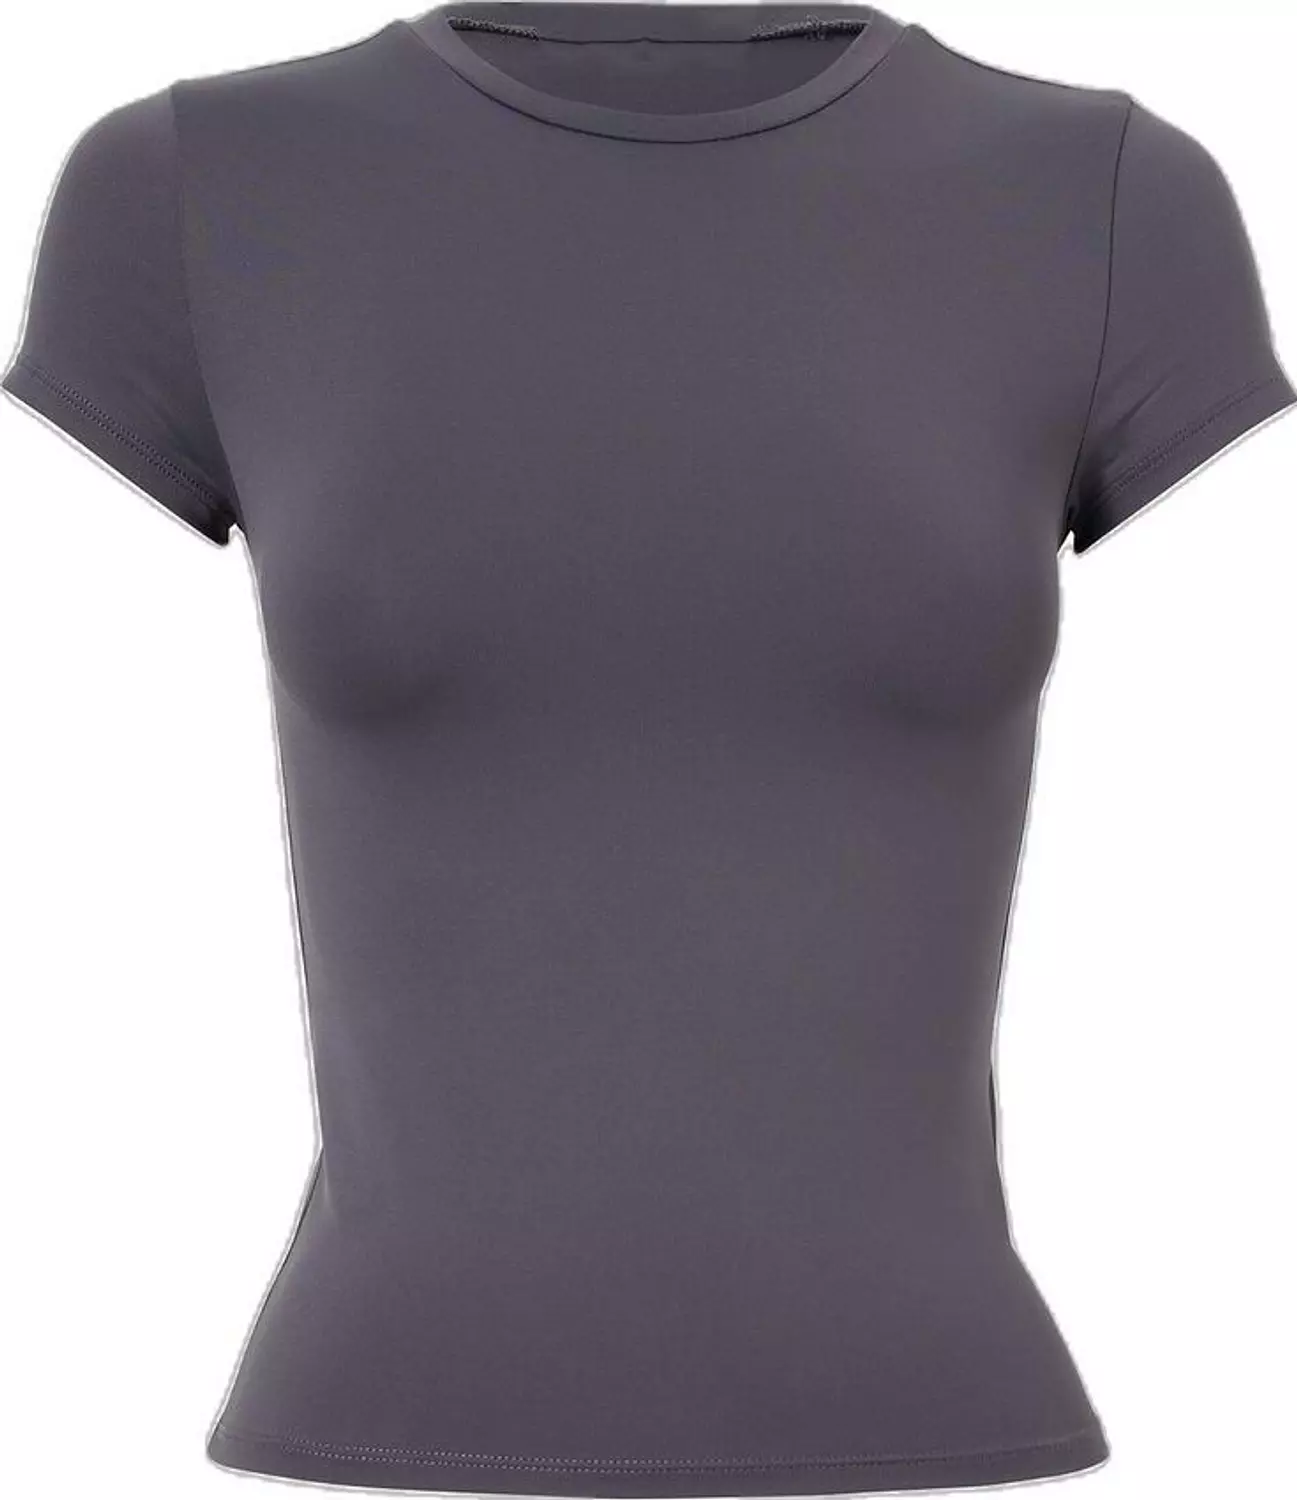 Grey Basic Top  hover image